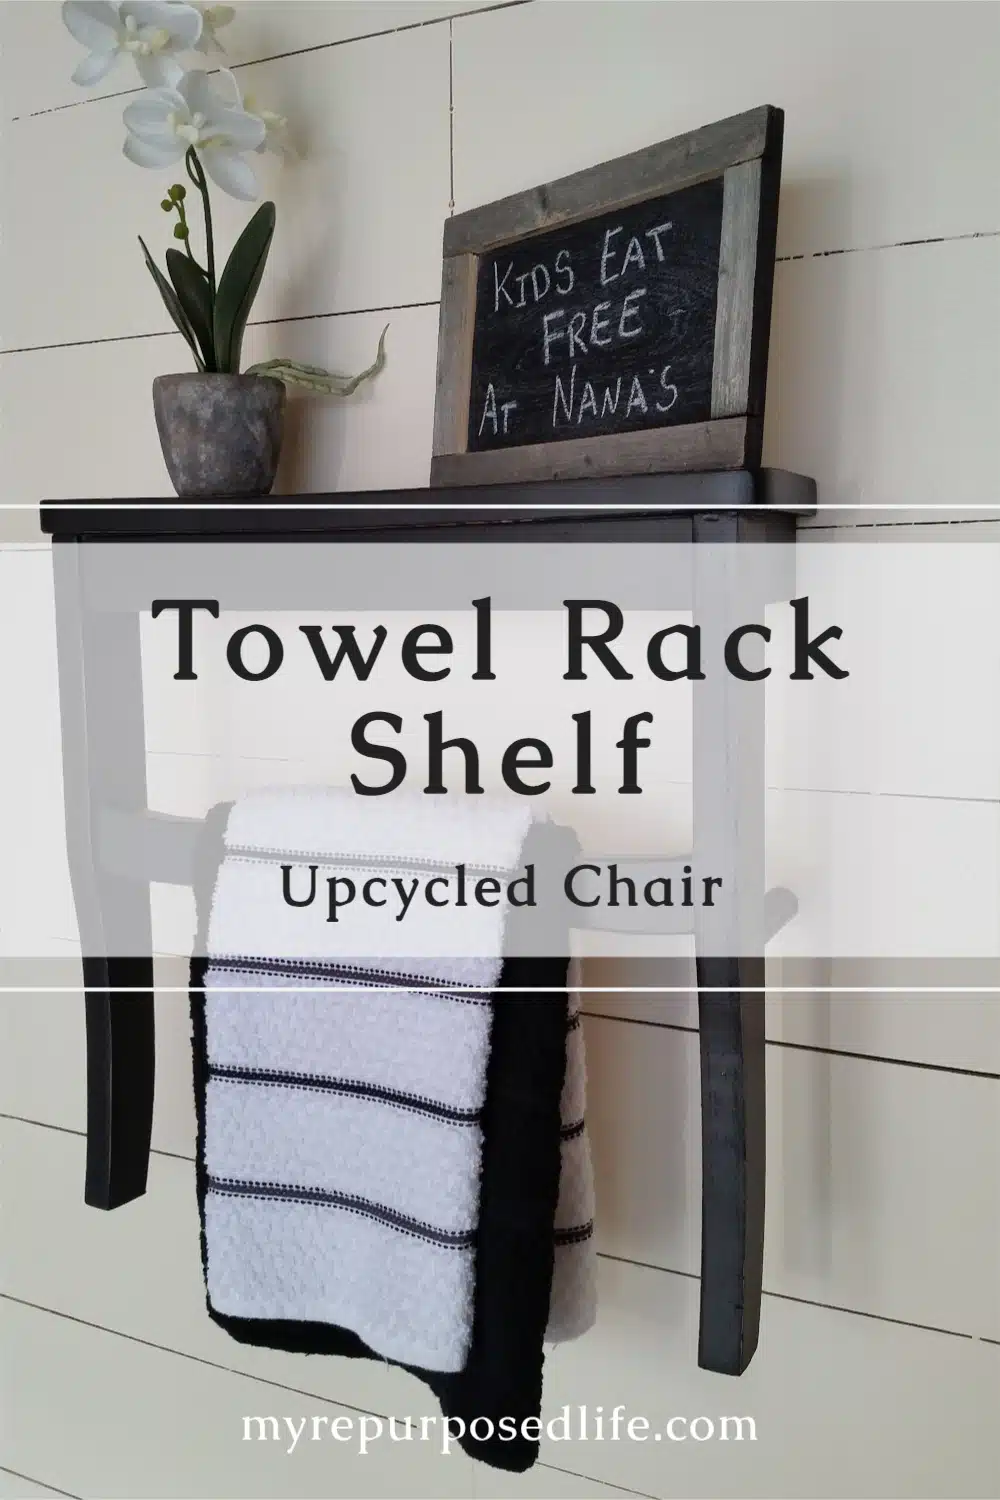 Using an old chair I'll show you how to make a fun, unique wall shelf using the chair seat. Perfect for a guest bath or guest room. Shelf with a towel rack, so easy! #MyRepurposedLife #upcycle #chair #repurposed #shelf #towelrack via @repurposedlife